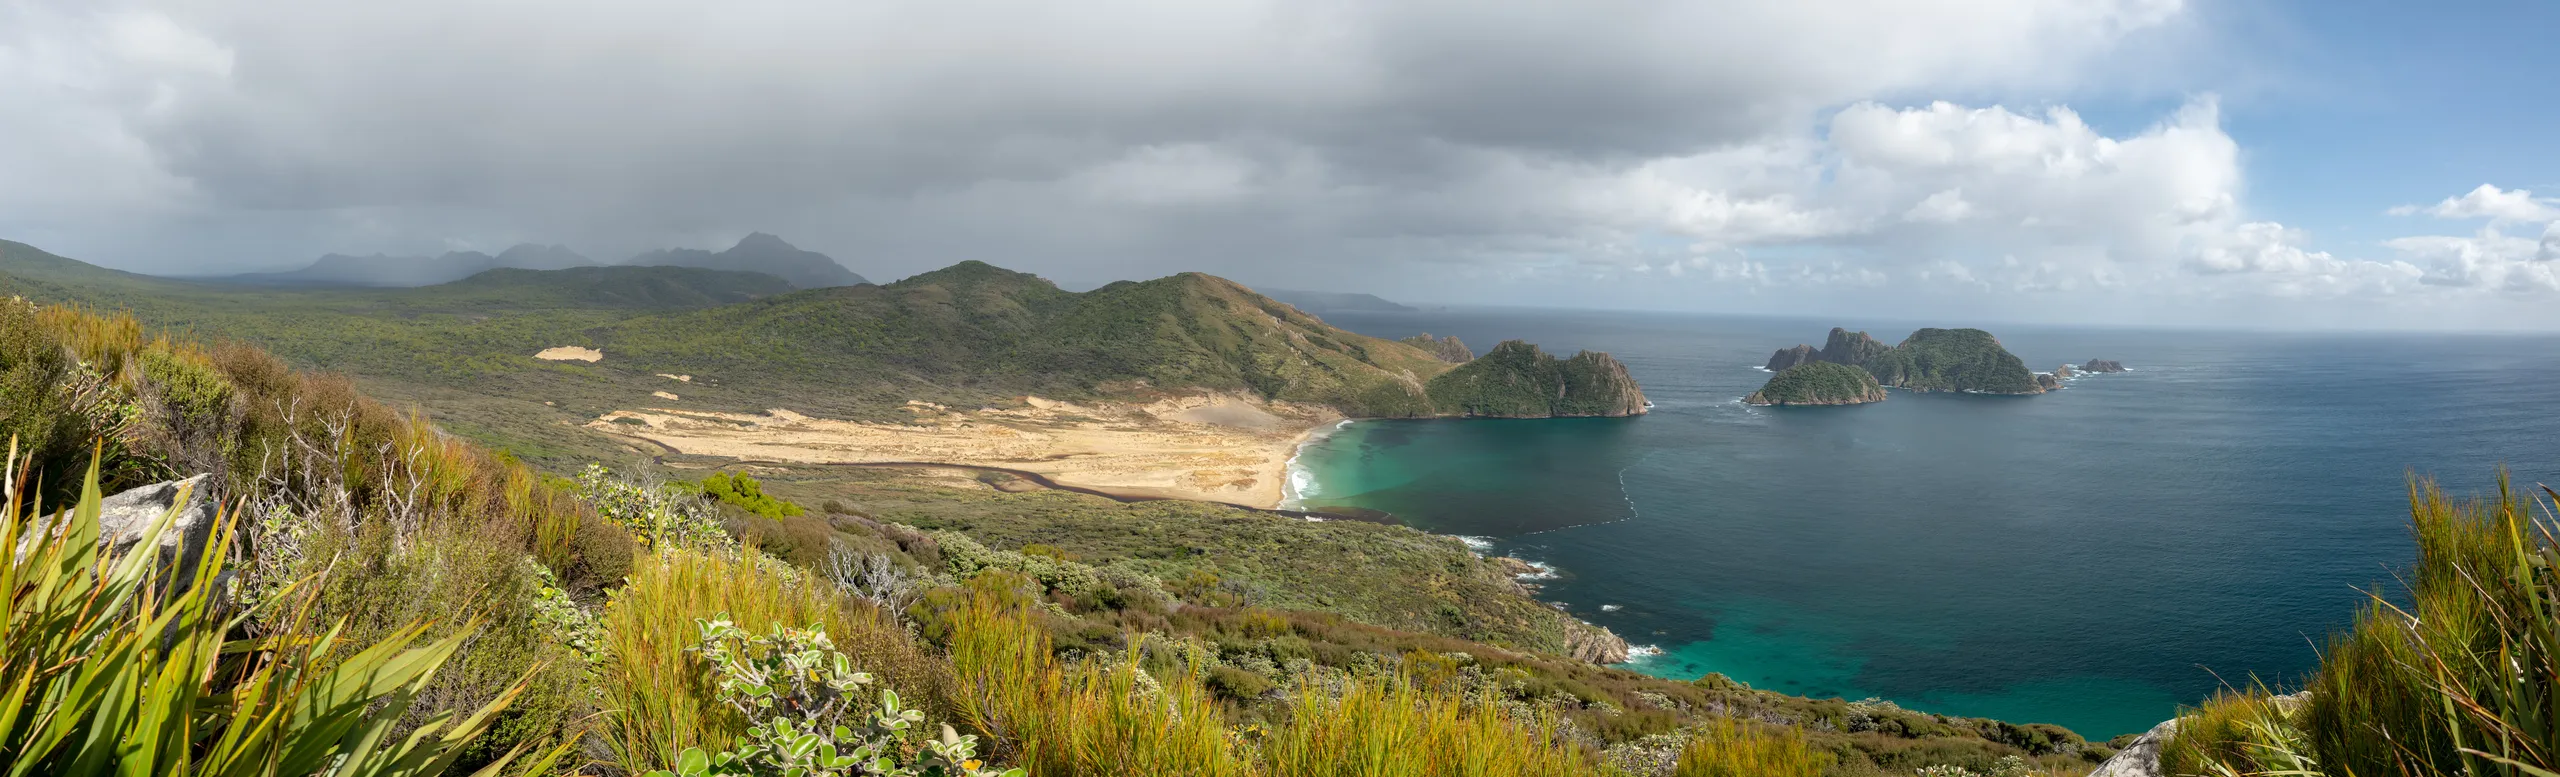 Looking west to East Ruggedy Beach and the Rugged Islands with the Ruggedy Mountains visible in the distance along with approaching rain